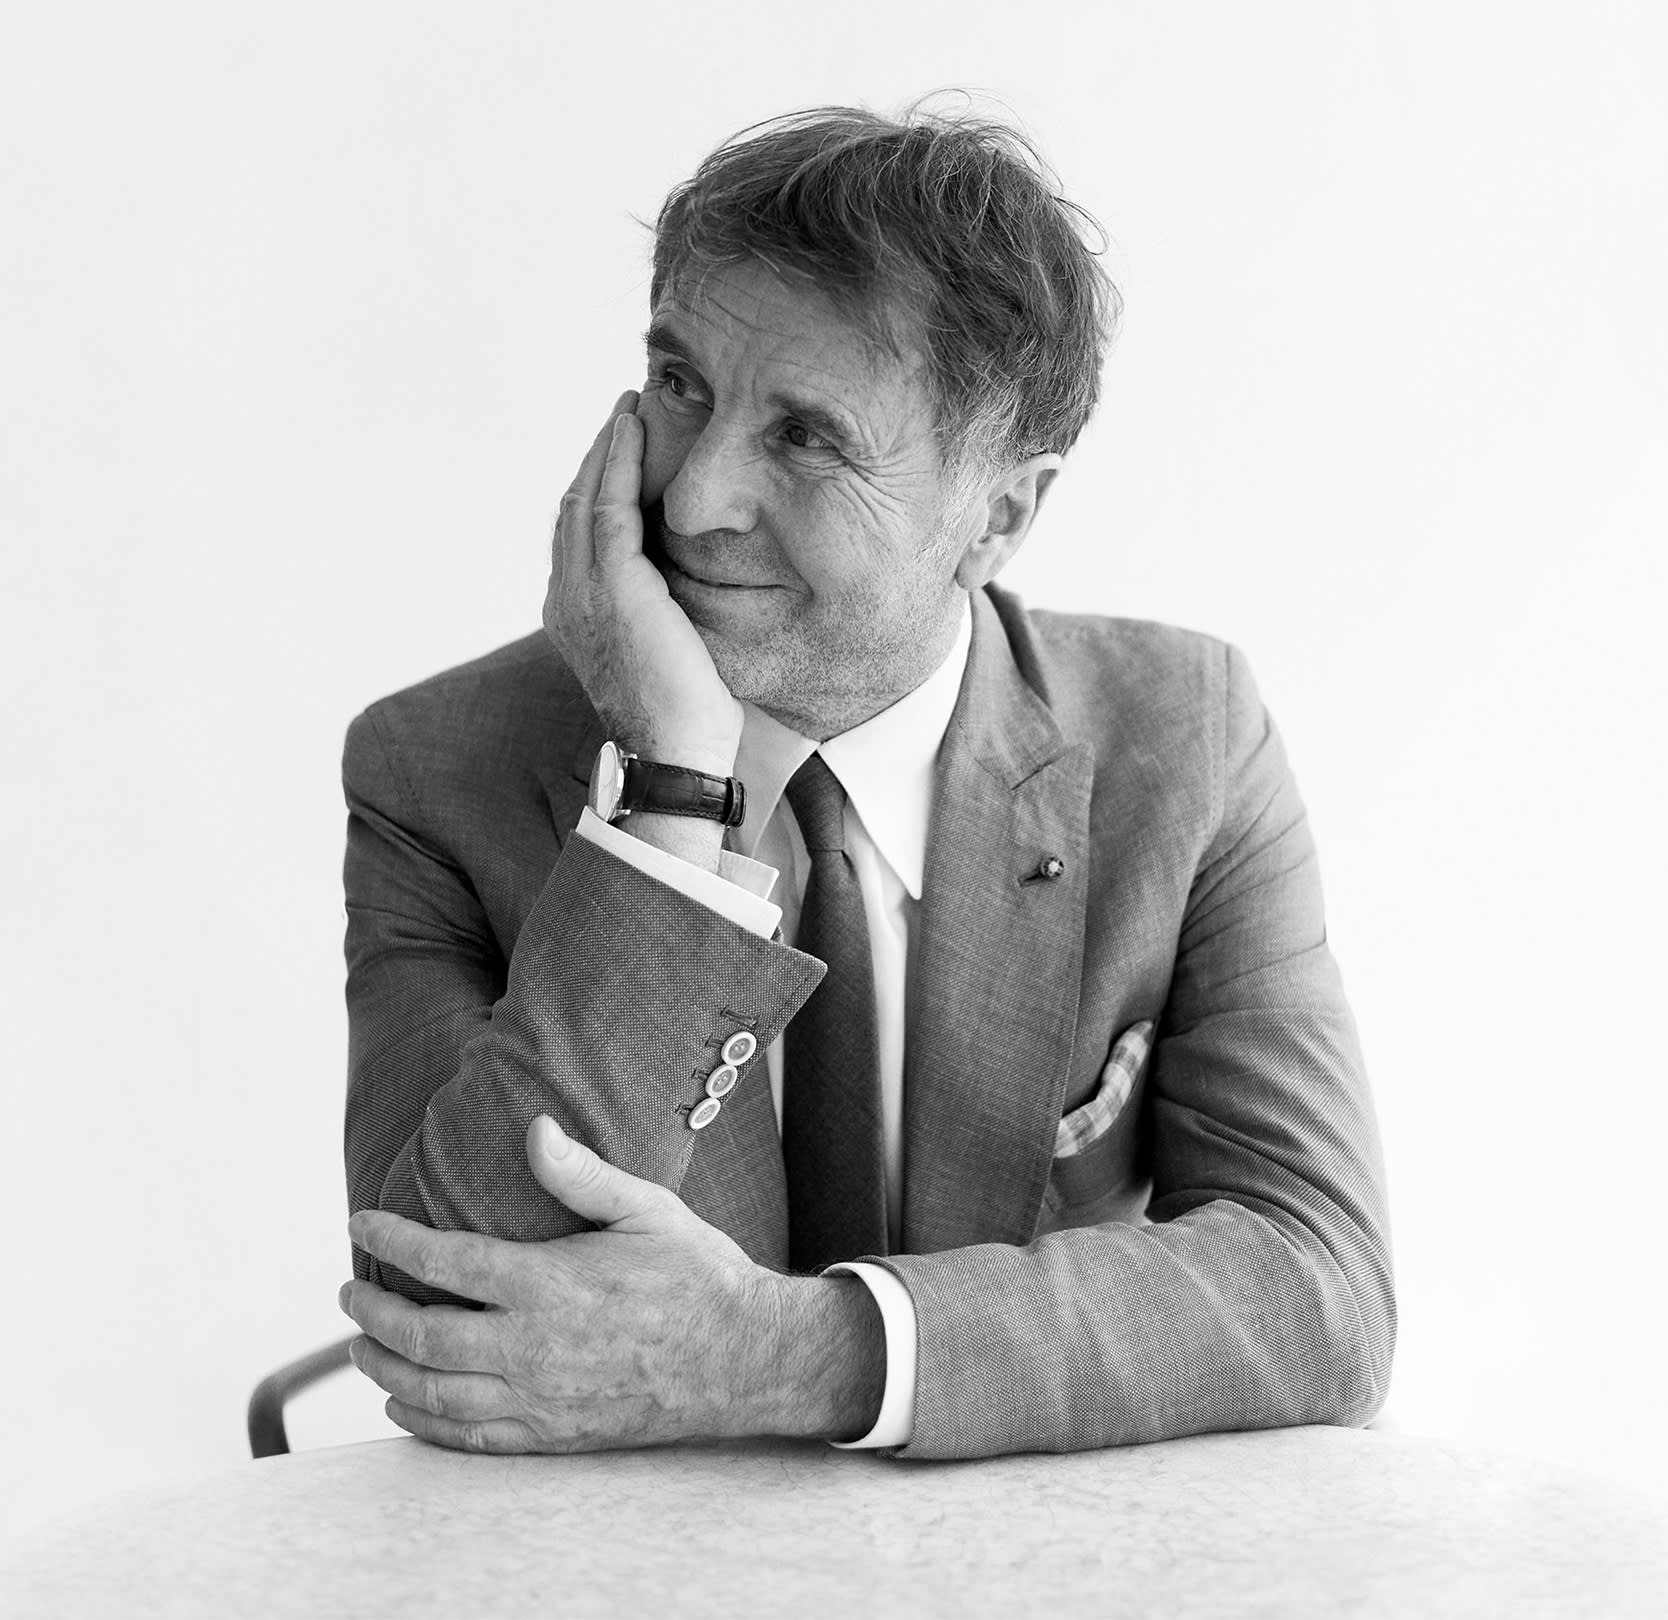 Brunello Cucinelli on the desire to be far away from the crowd